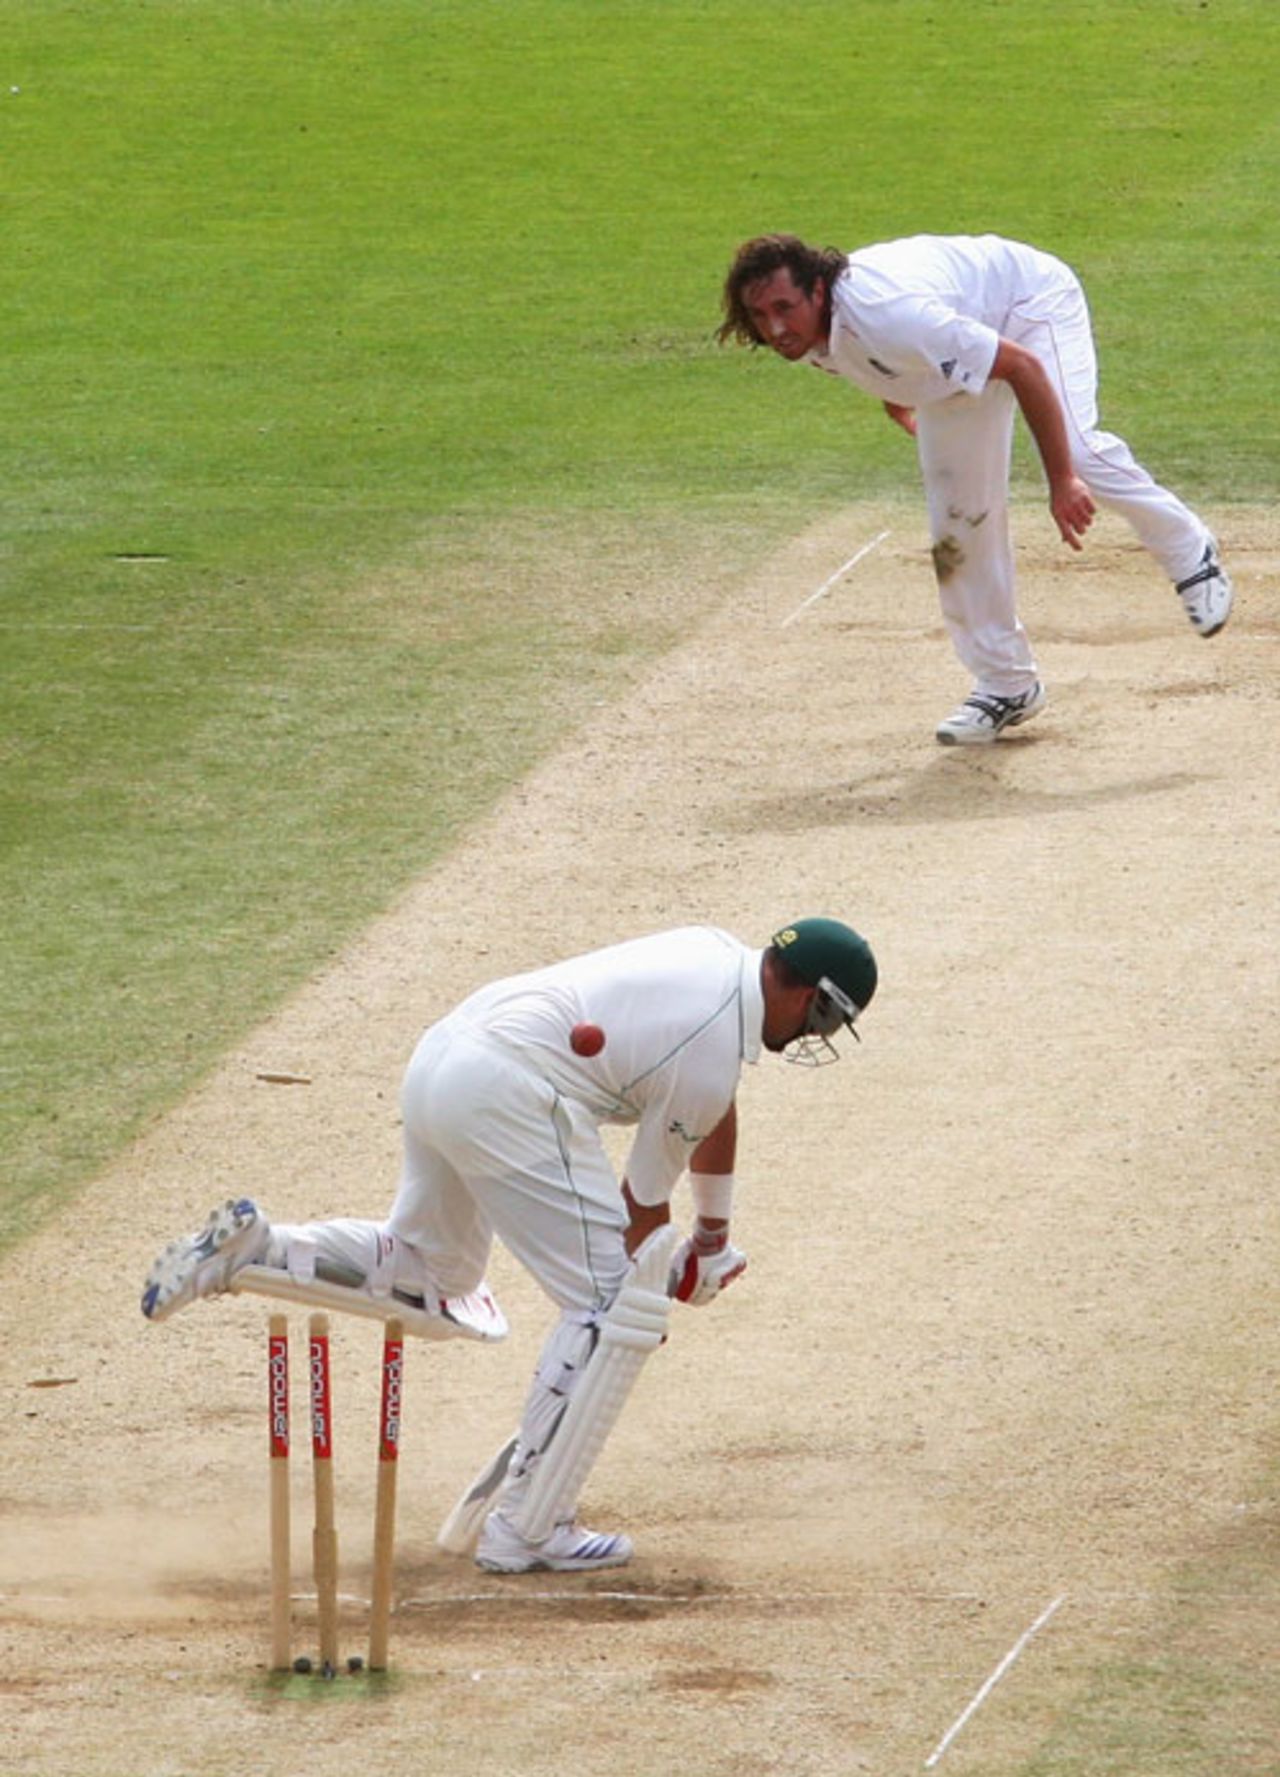 Jacques Kallis is comprehensively cleaned up by Ryan Sidebottom, England v South Africa, 1st Test, Lord's, 5th day, July 14, 2008